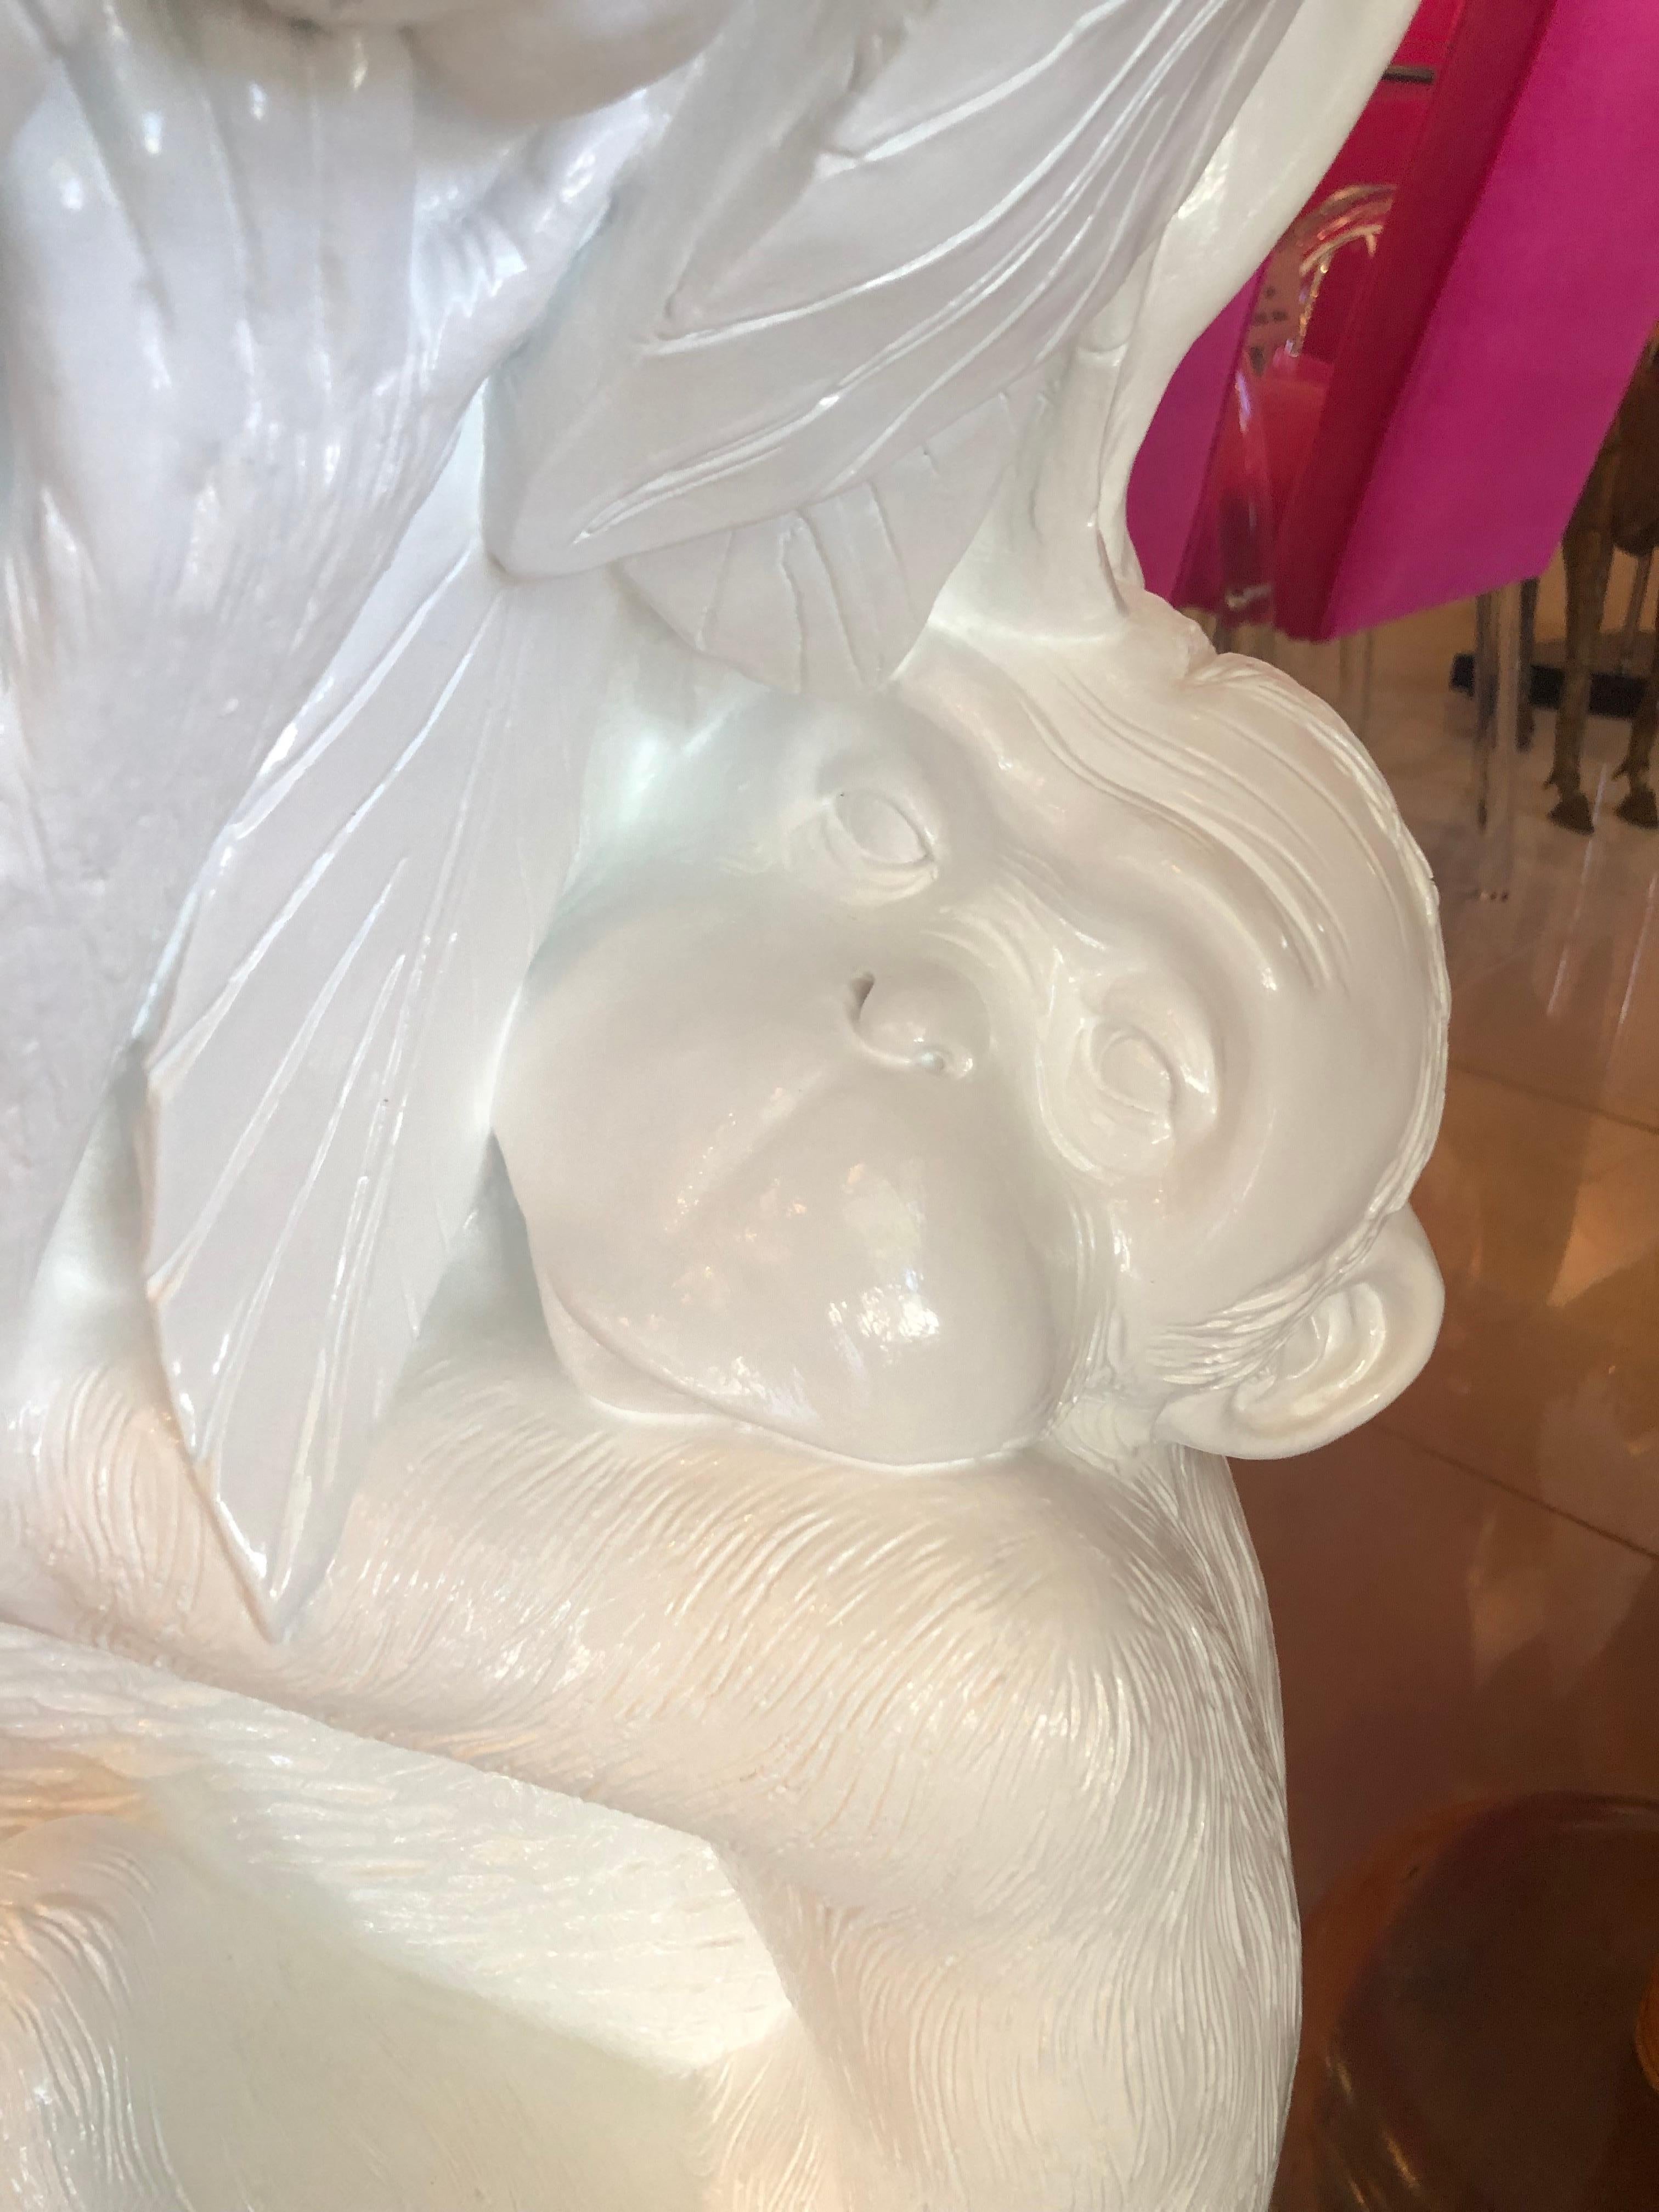 Vintage center table or dining table base, very heavy plaster, newly lacquered white gloss. Glass top not included. Monkey climbing a palm tree with coconuts. This looks wonderful from every angle! Perfect for that Palm Beach, tropical decor!